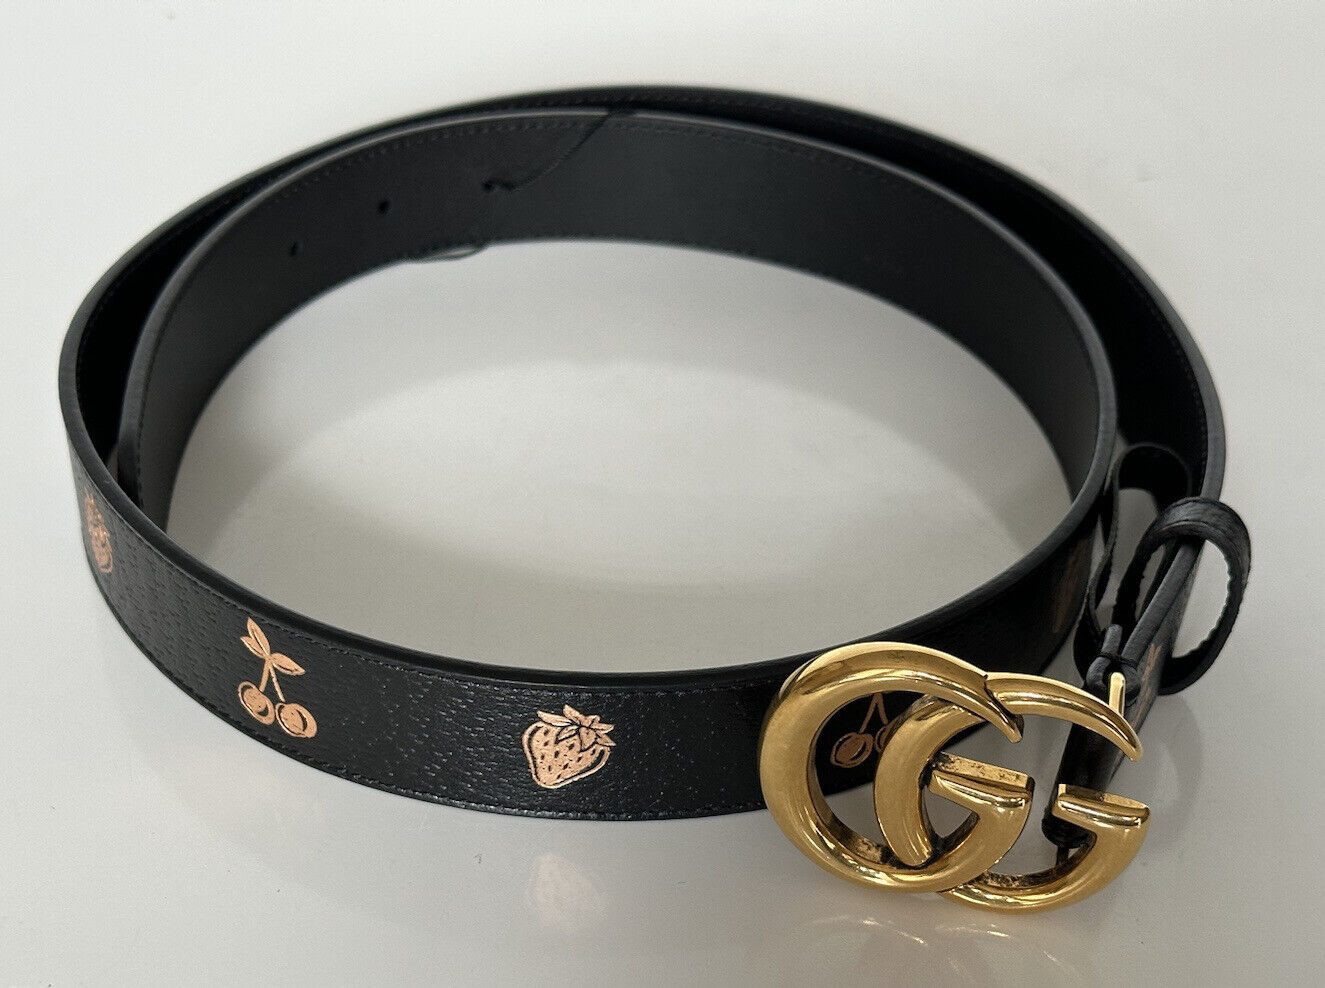 New Gucci Women's GG Marmont Leather Belt Black  95/38 Italy 625839